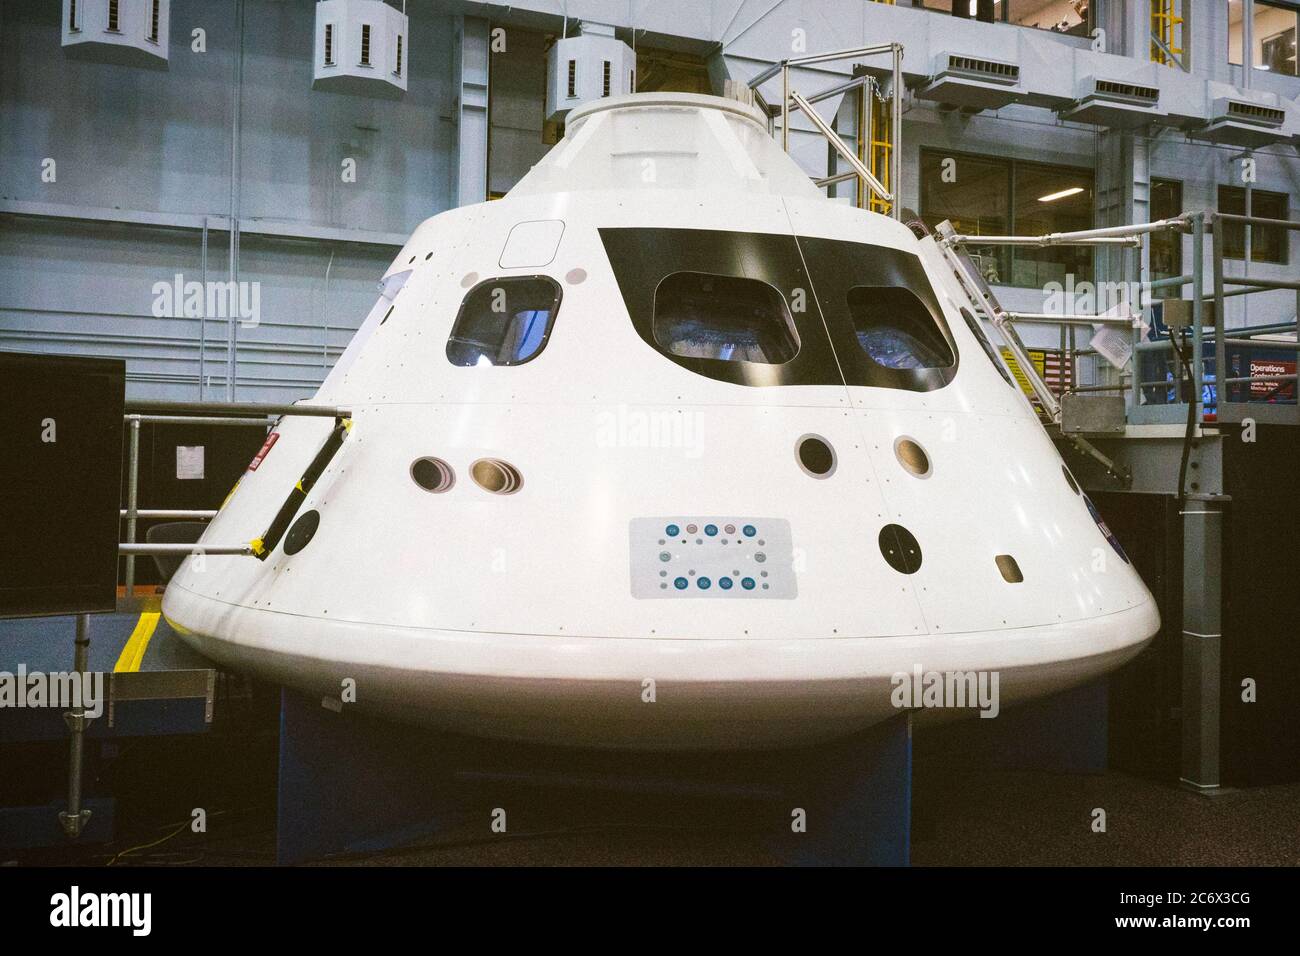 An old space capsule, city of Houston USA. Stock Photo